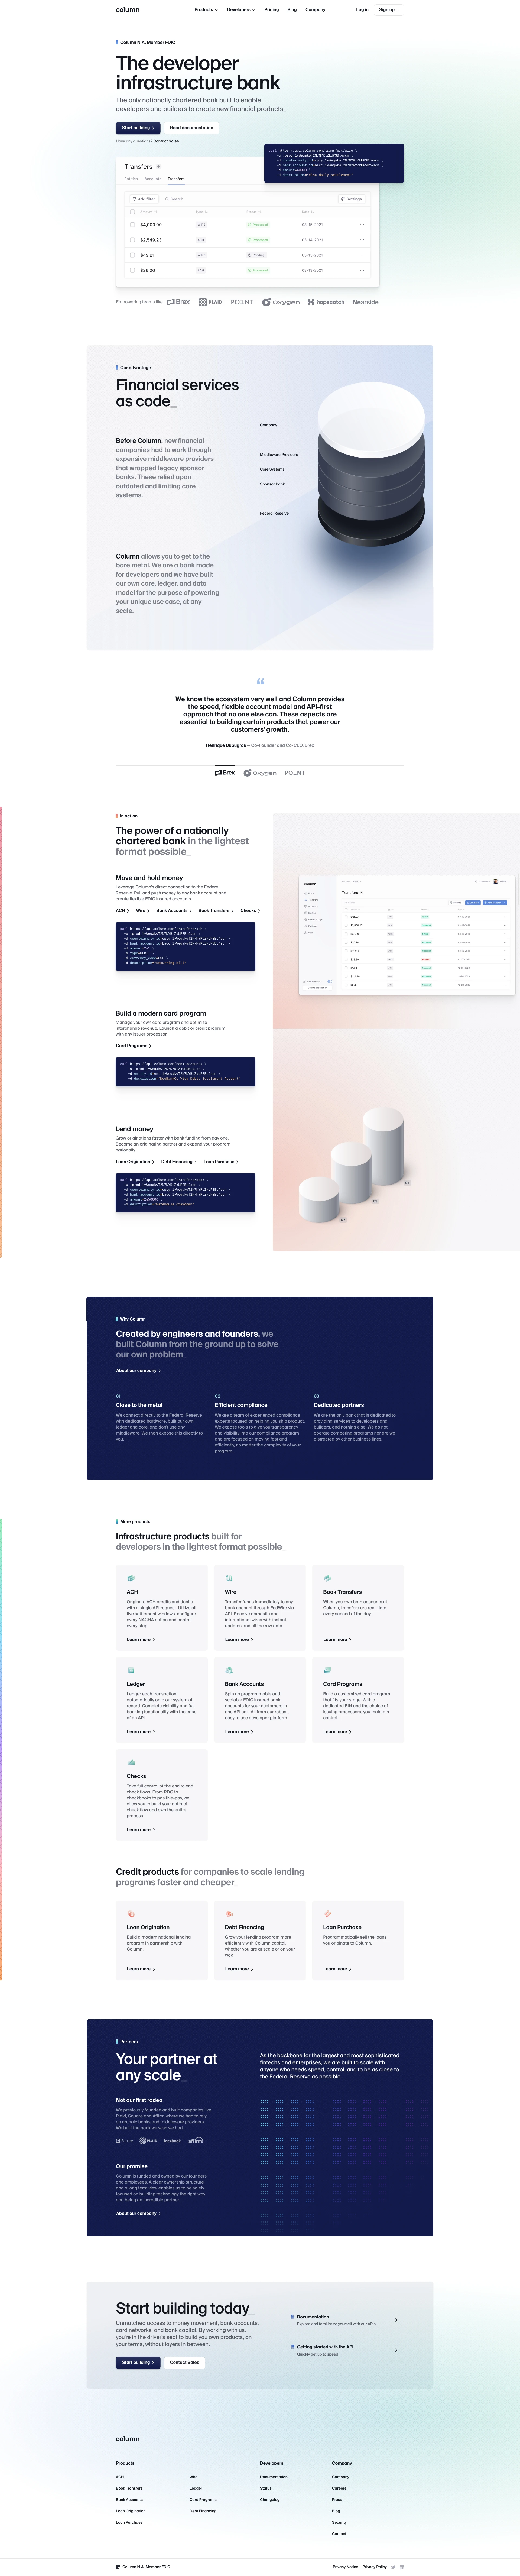 Column Landing Page Example: The developer infrastructure bank. The only nationally chartered bank built to enable developers and builders to create new financial products.